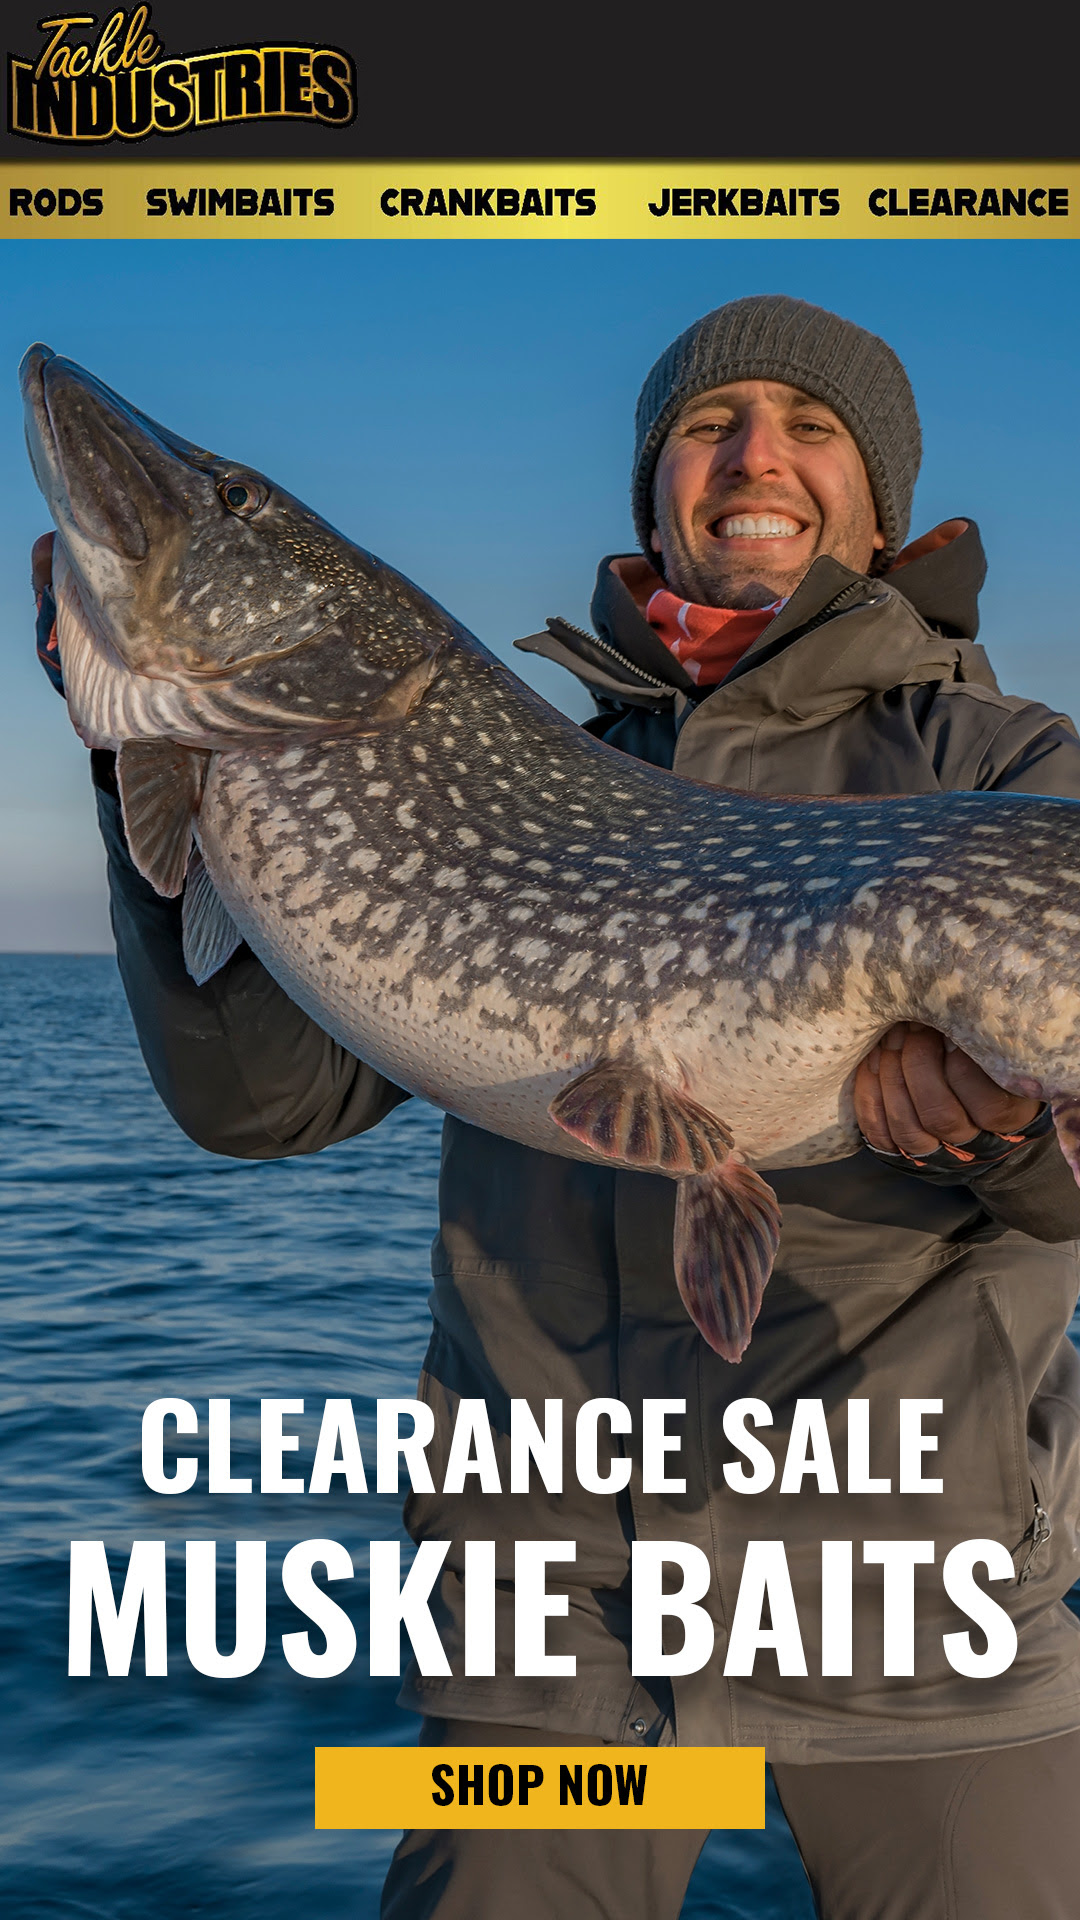 https://www.outdoorsfirst.com/muskie/wp-content/uploads/sites/3/2022/08/unnamed.jpg